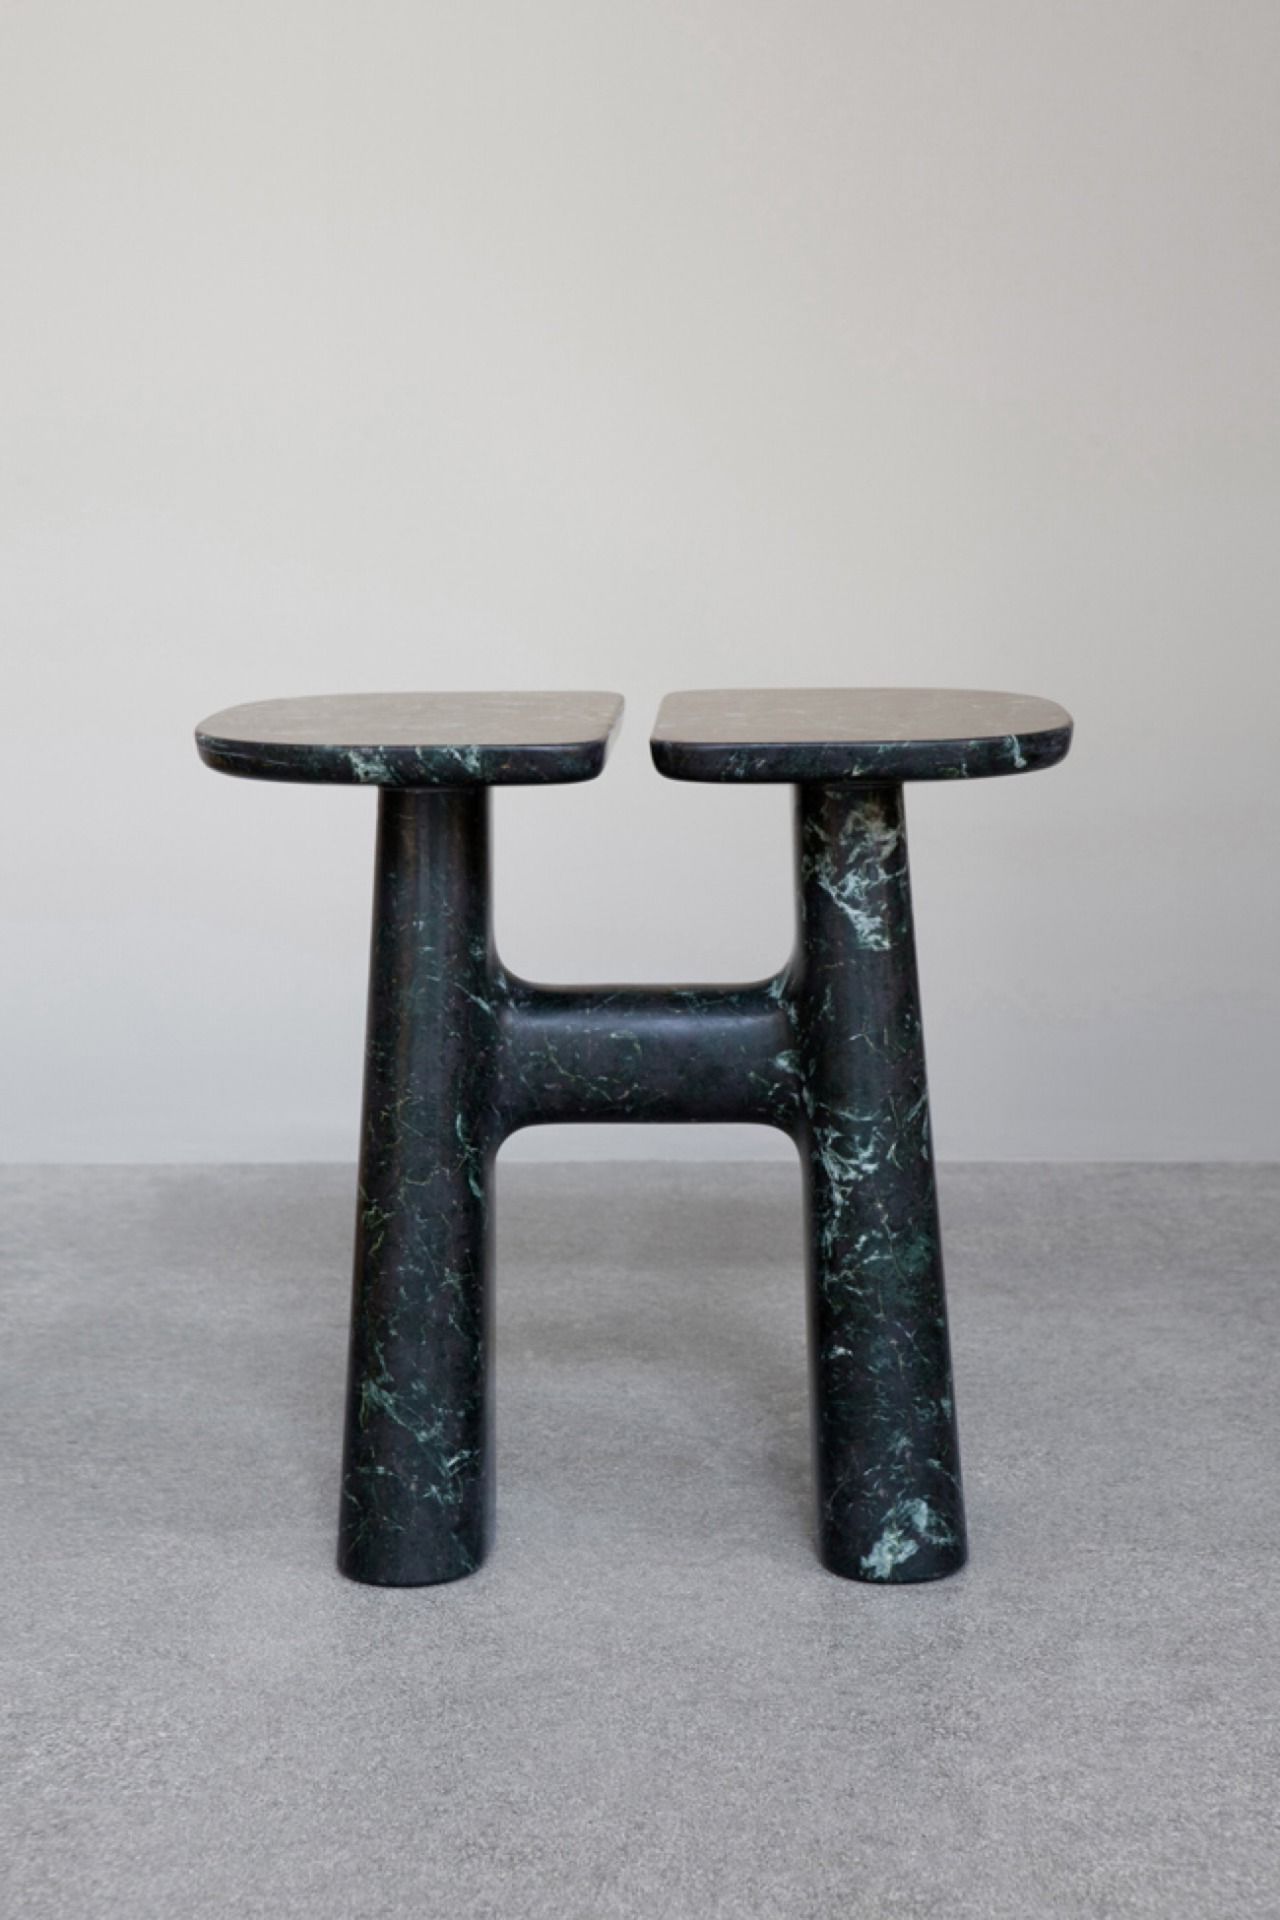 Most Recent Tillia Ceramic Garden Stools In Curatedjon Gasca Life Is Full Of Beautiful Things (View 16 of 30)